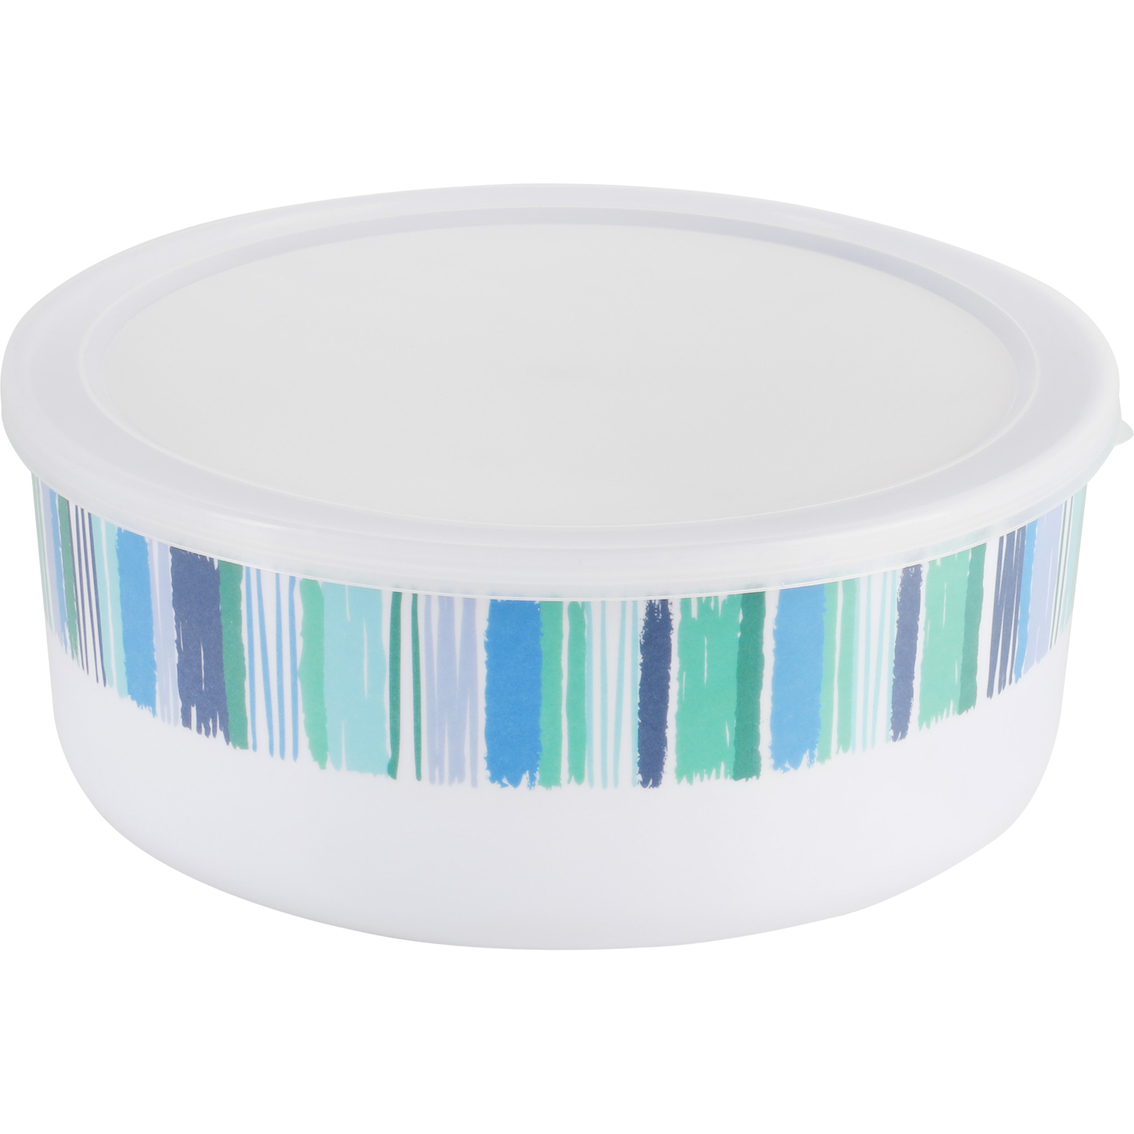 Gibson Home Tropical Sway Orleans Blue 3 pc. Storage Bowl Set, White Acrylic - Image 2 of 4